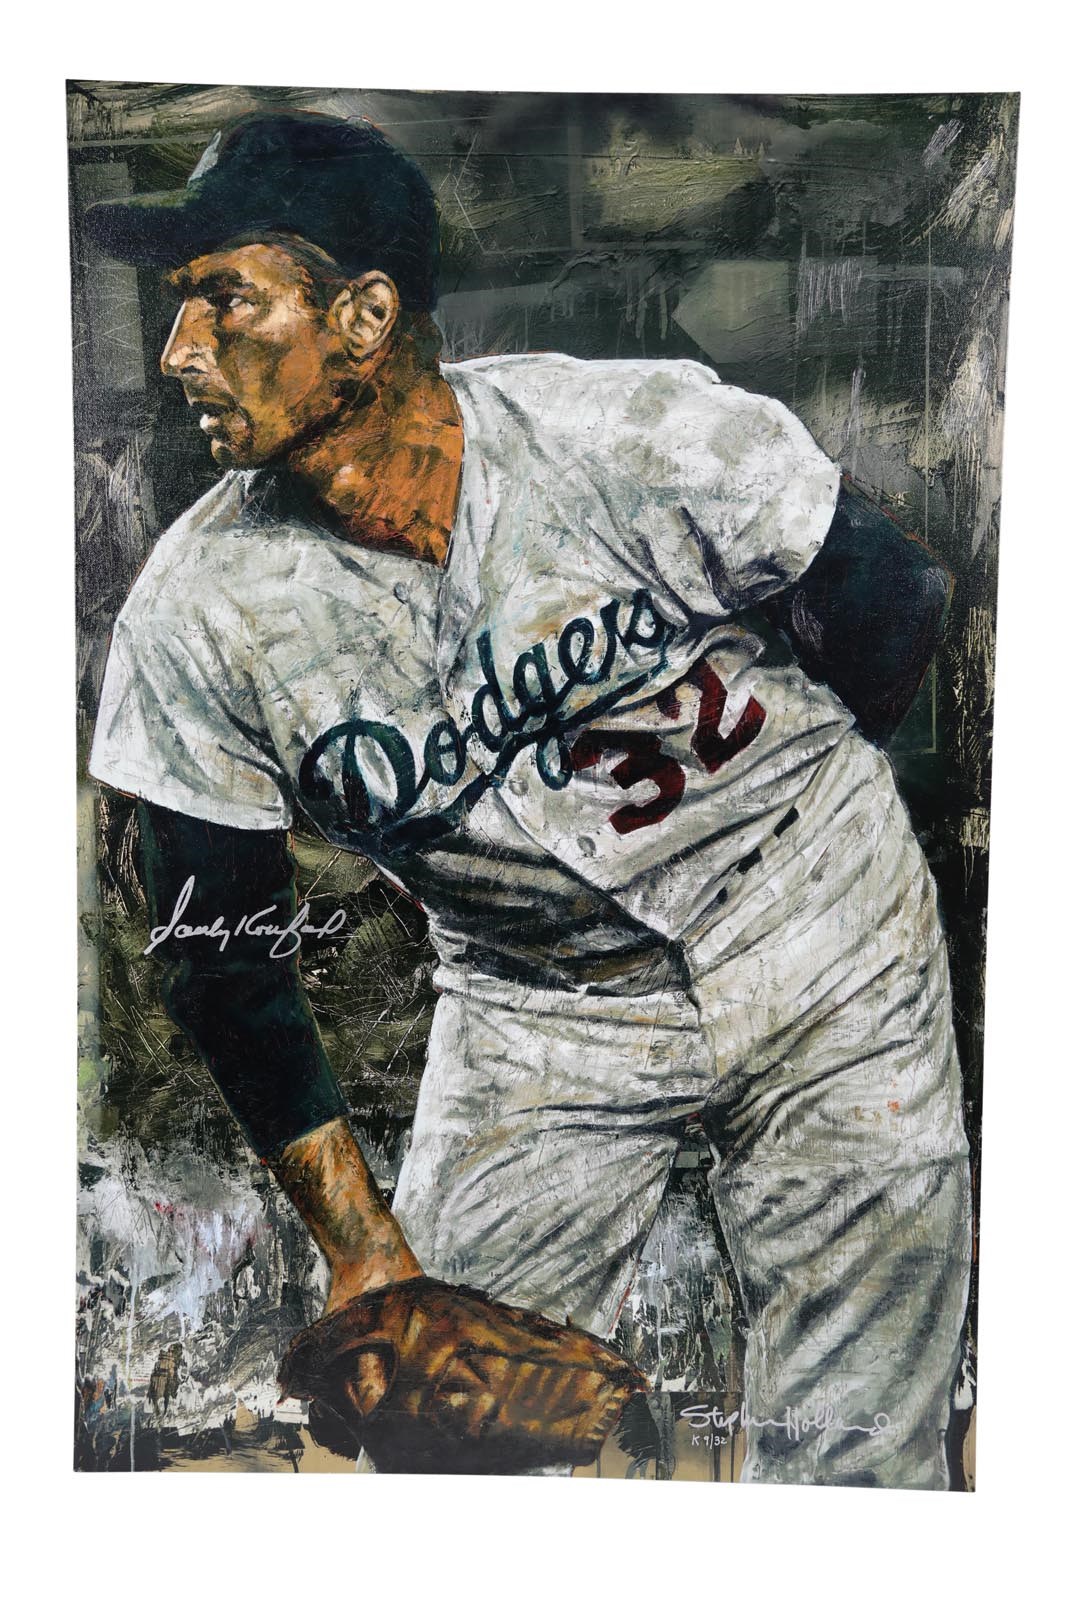 Koufax "Profile" Special K Holland Proof Giclee